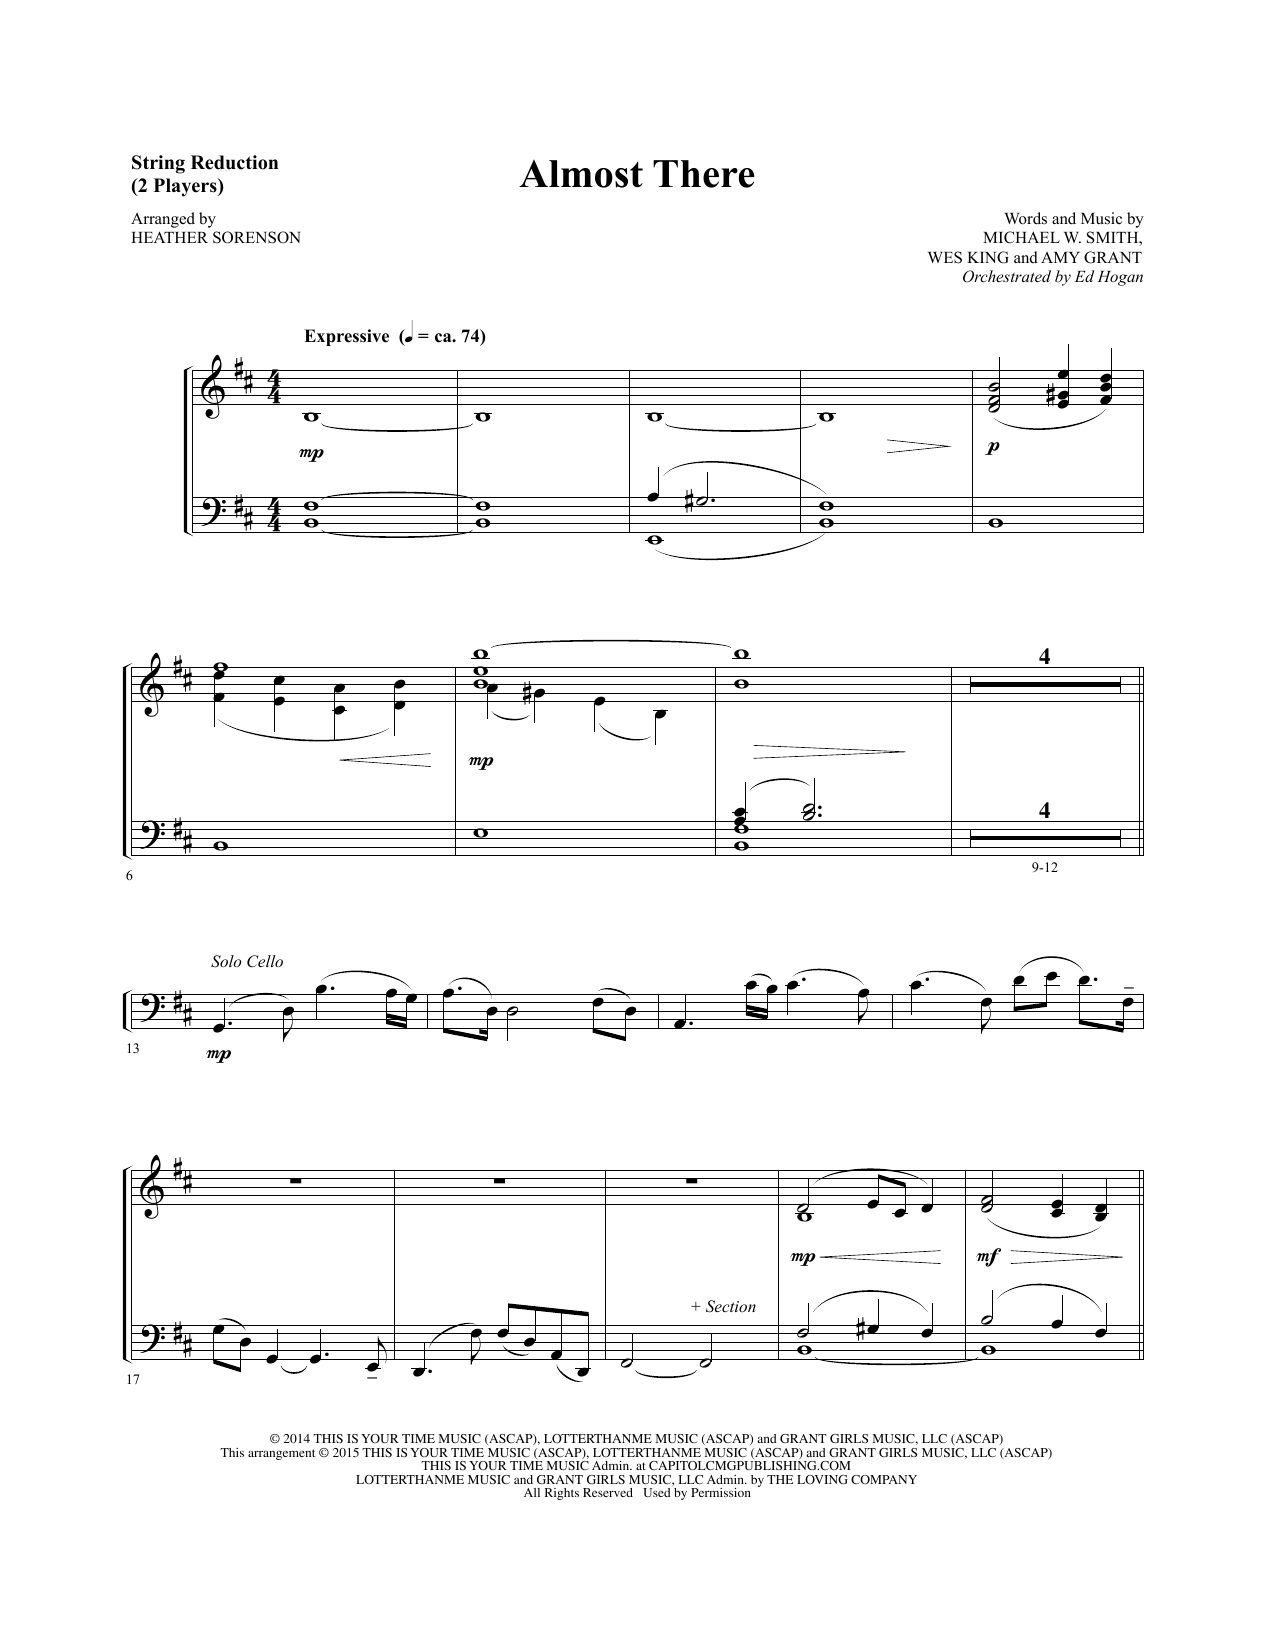 Heather Sorenson Almost There - Keyboard String Reduction sheet music notes and chords. Download Printable PDF.